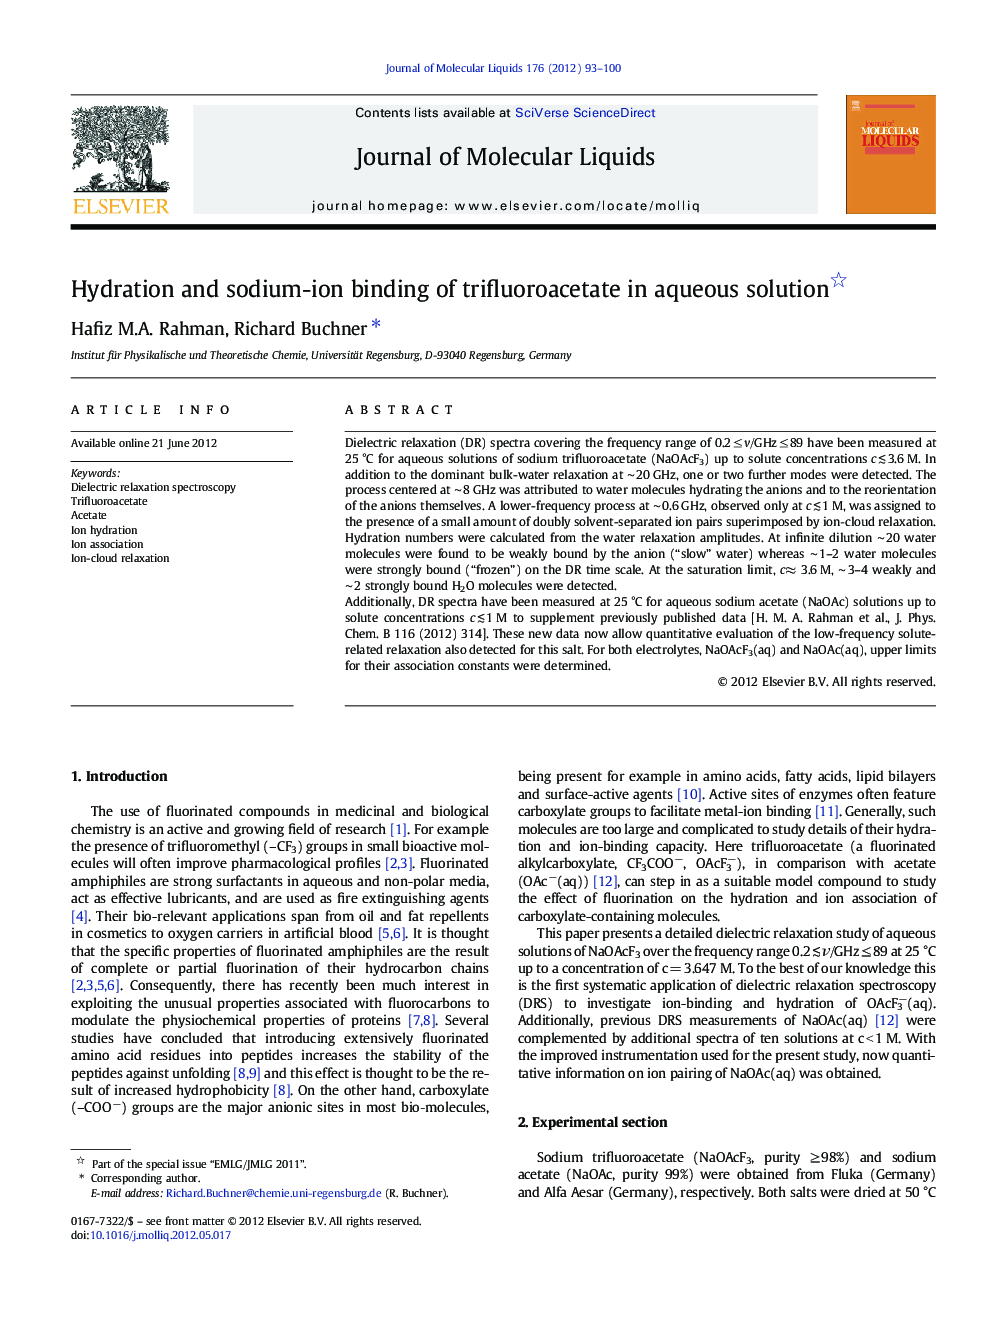 Hydration and sodium-ion binding of trifluoroacetate in aqueous solution